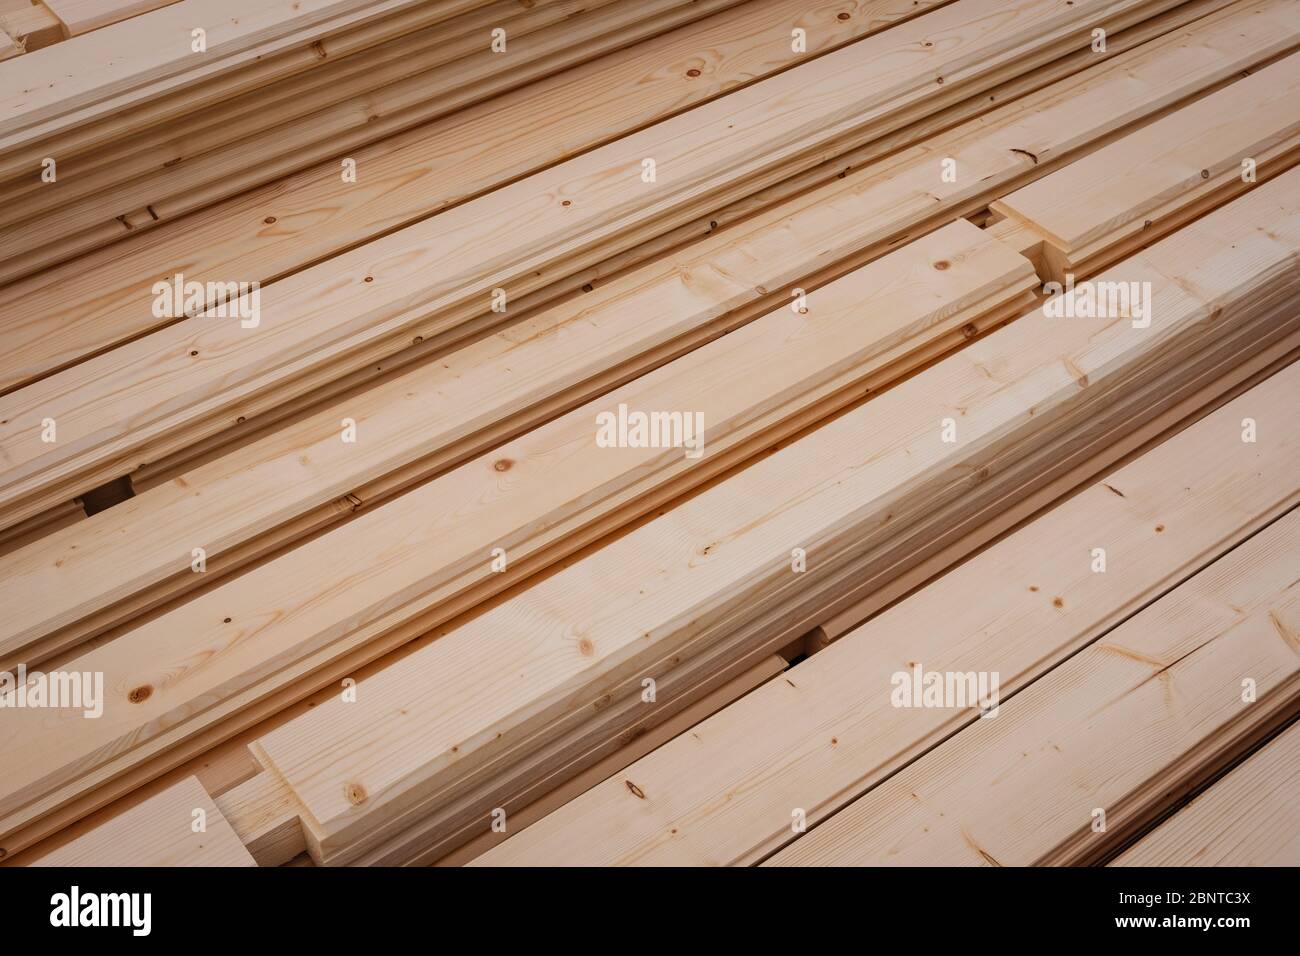 wooden beams, construction wood material - Stock Photo